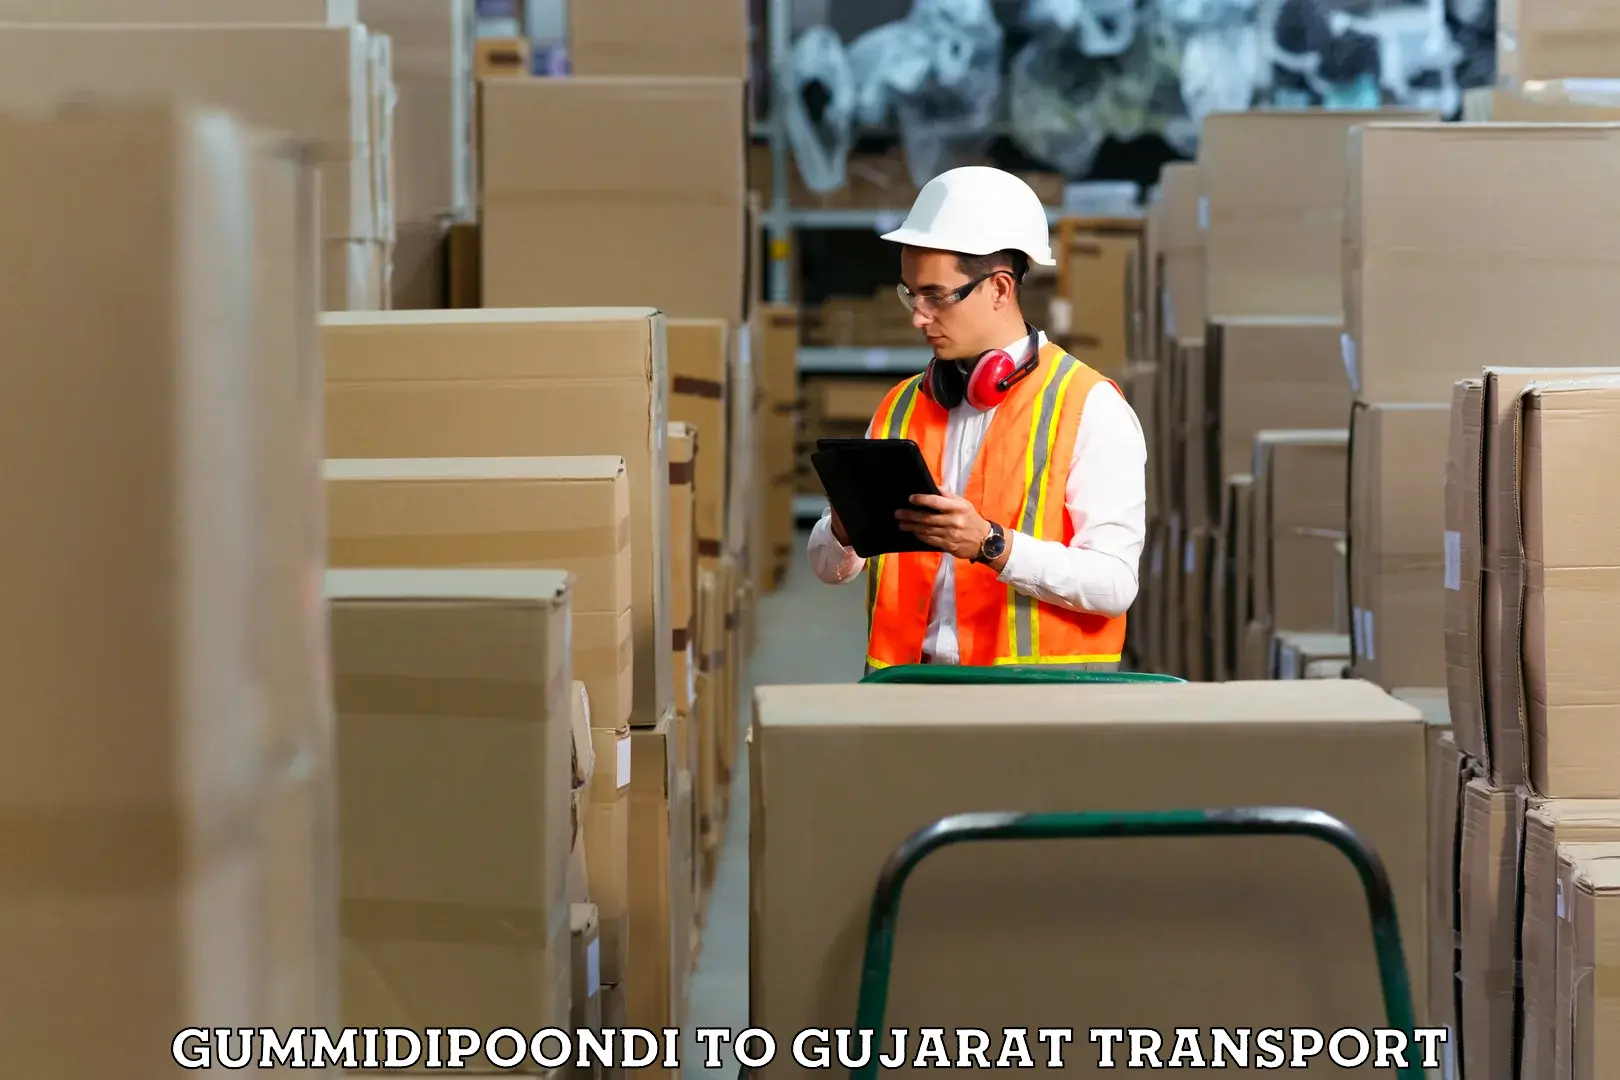 Delivery service Gummidipoondi to Ahmedabad